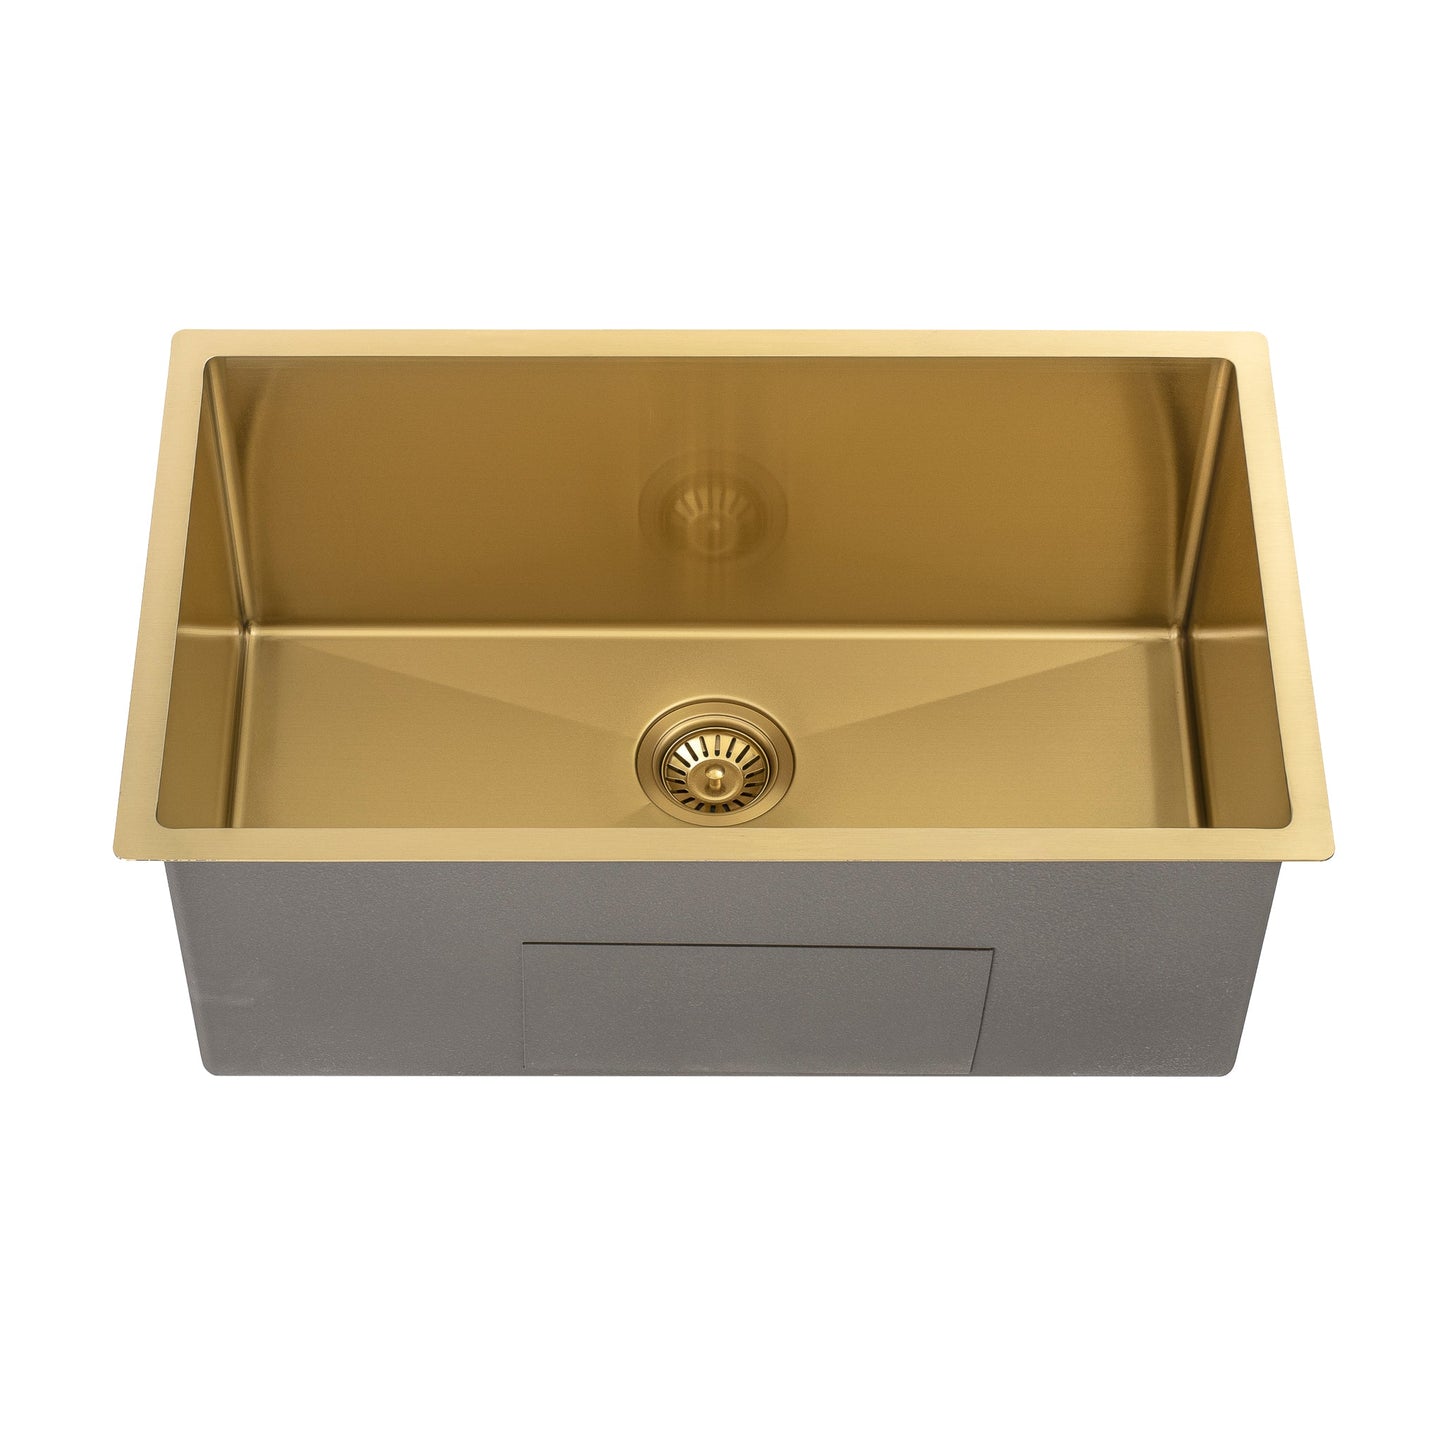 Retto II 750mm x 450mm x 300mm Extra Height Stainless Steel Sink, Brushed Brass Gold